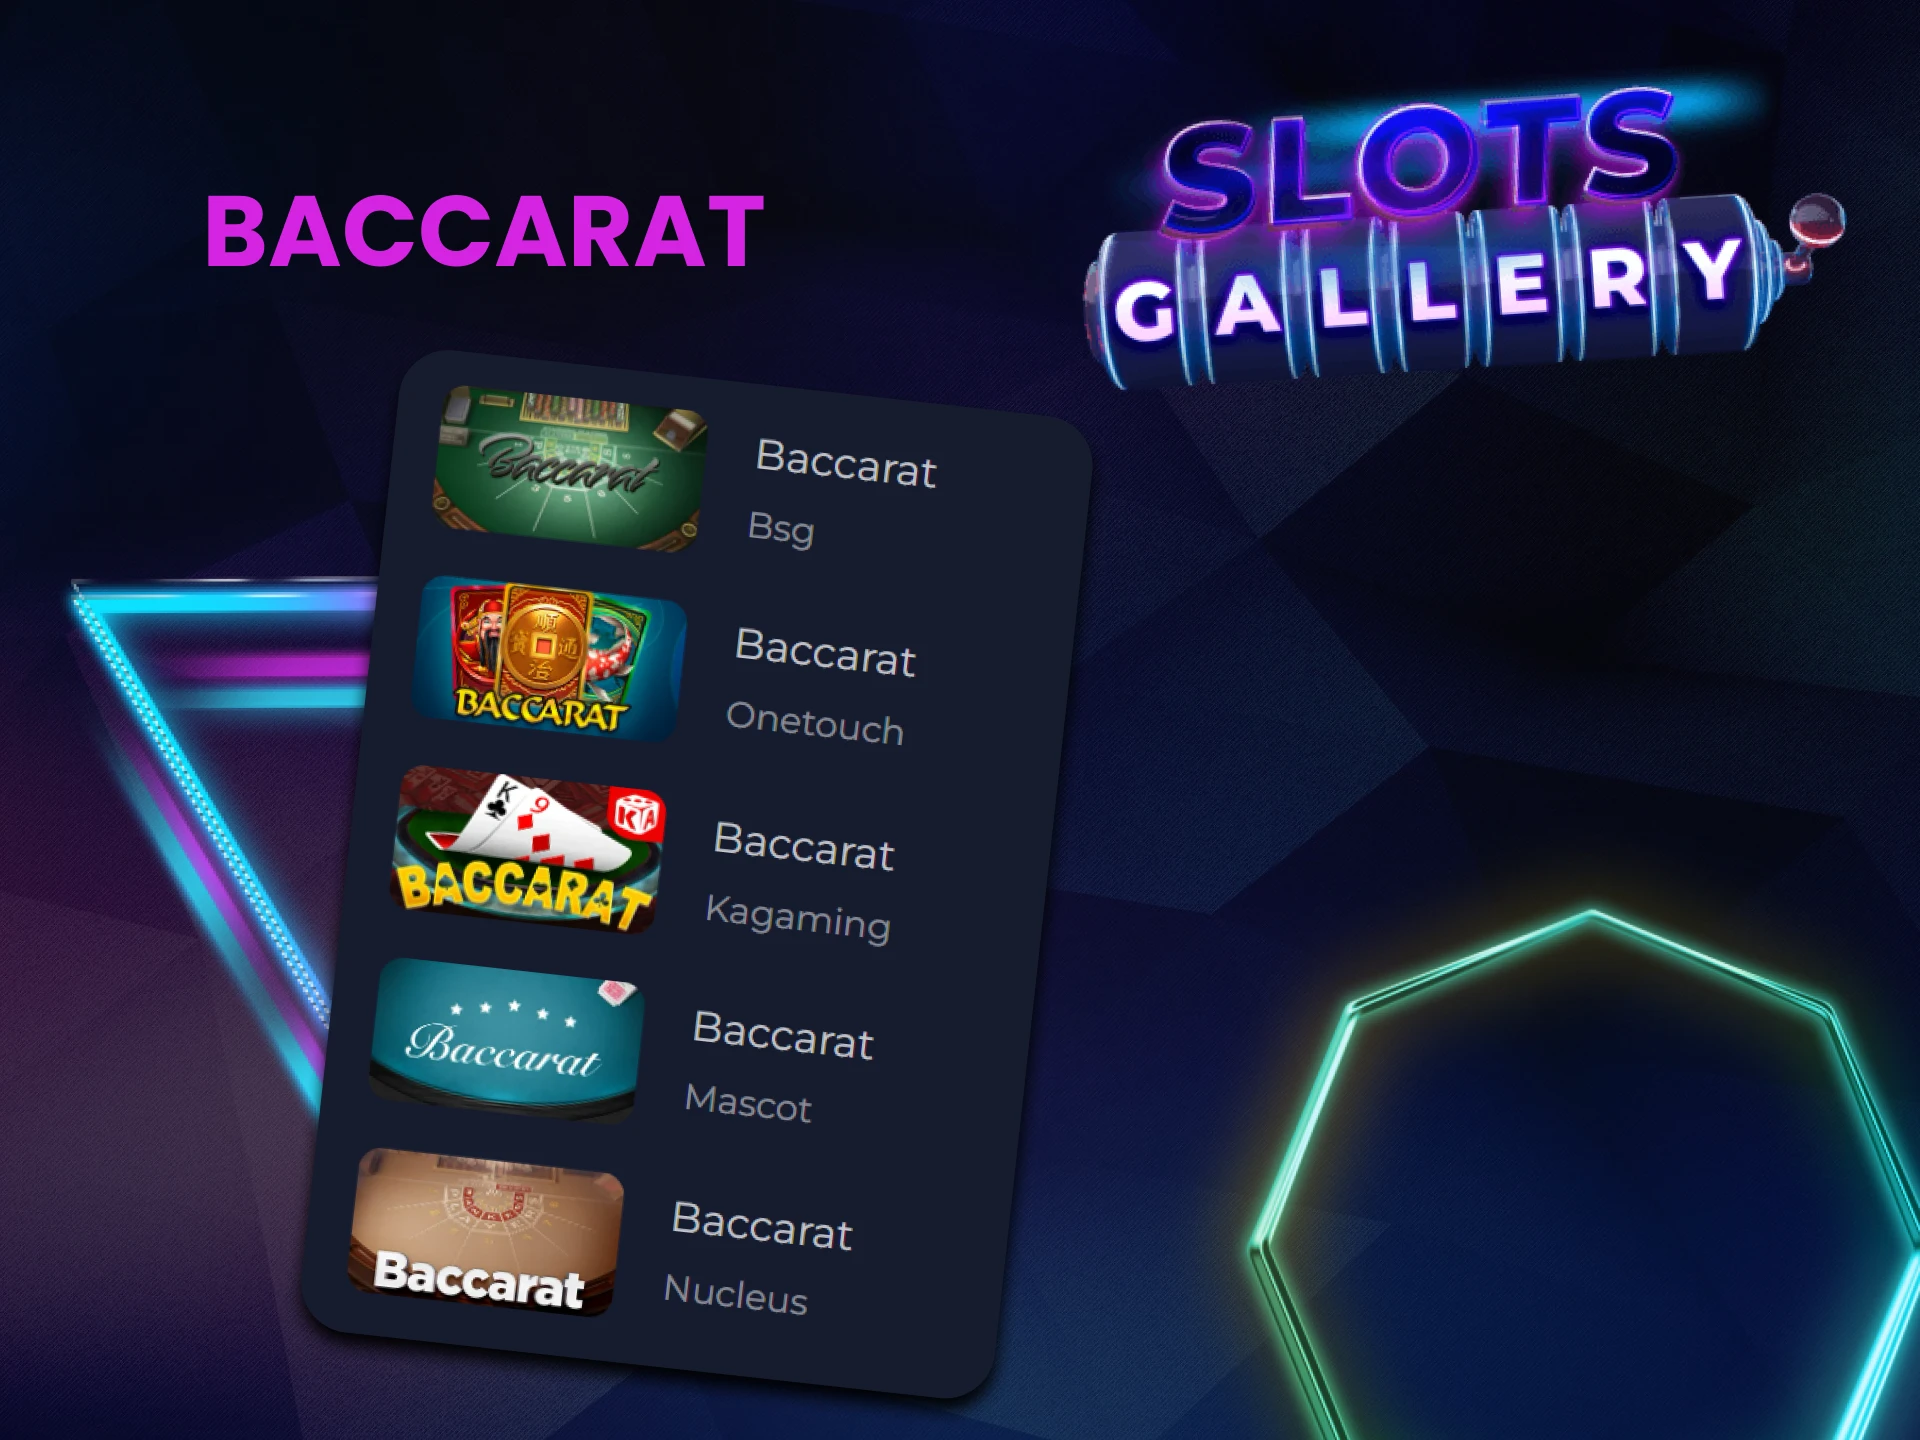 Play Baccarat on the Slots Gallery website.